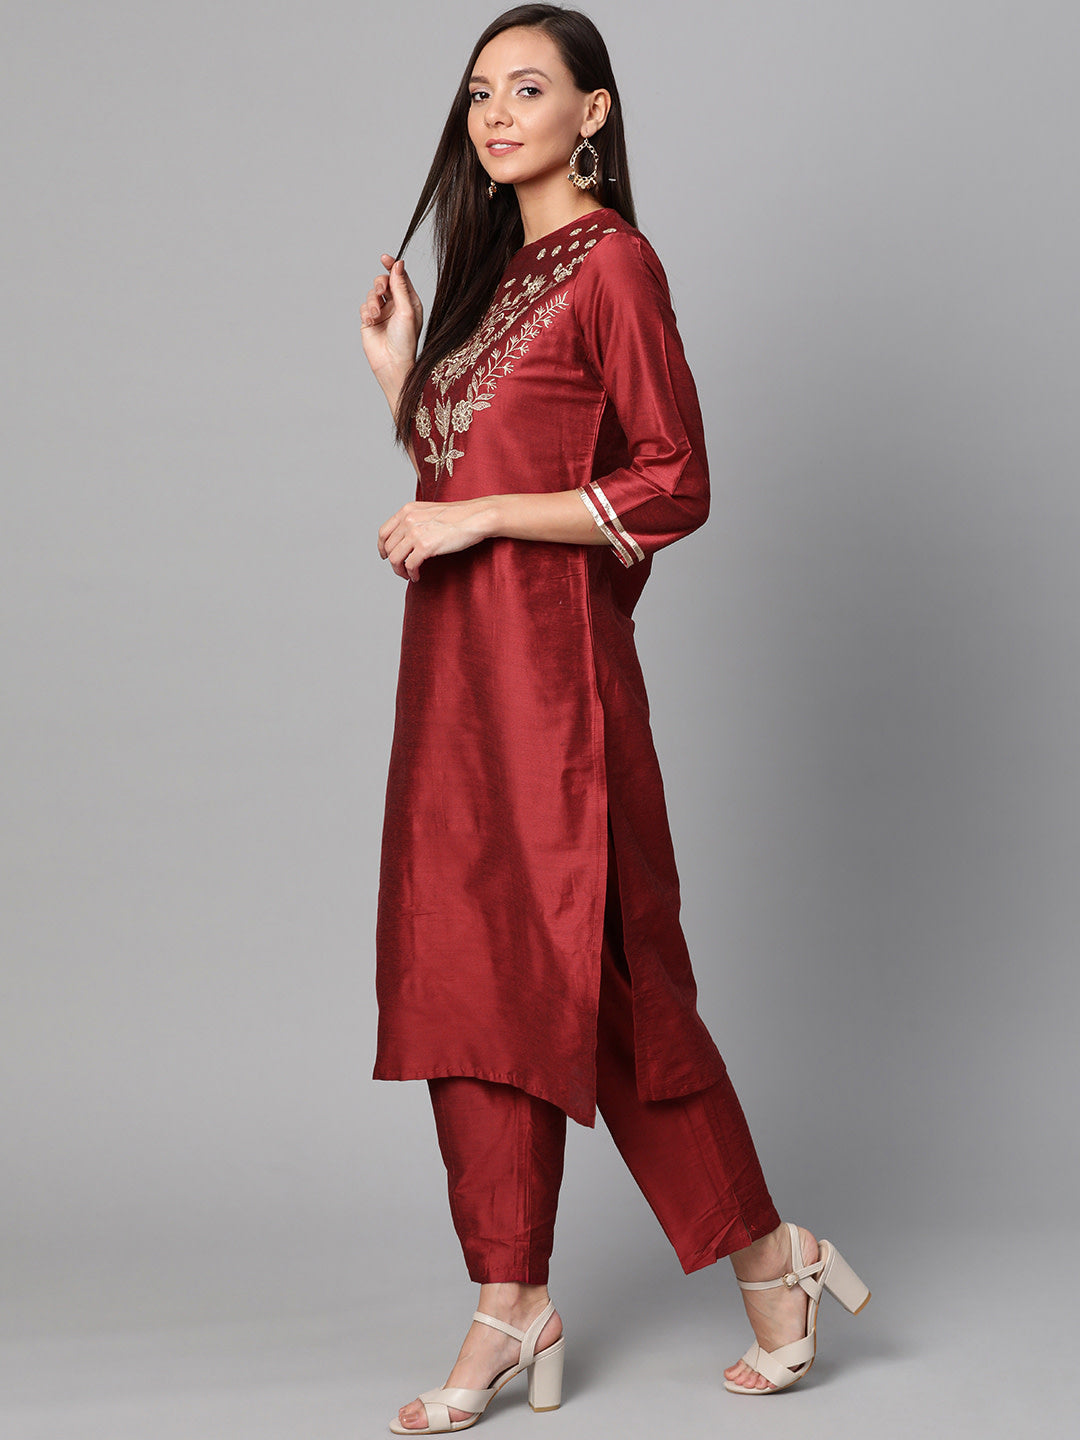 Women's Maroon And Golden Yoke Design Kurta With Trousers - Bhama Couture